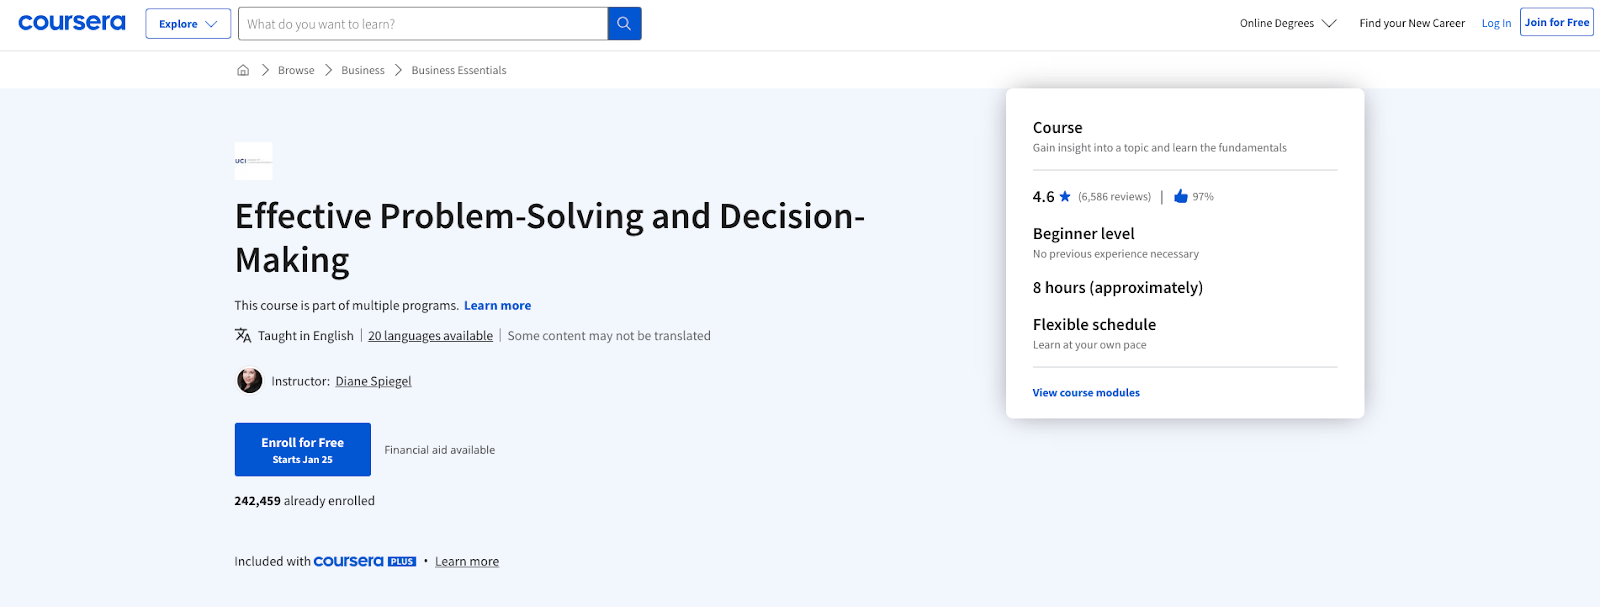 The Effective Problem-solving and Decision-making course by the University of California teaches the fundamentals of making faster, better choices at work.